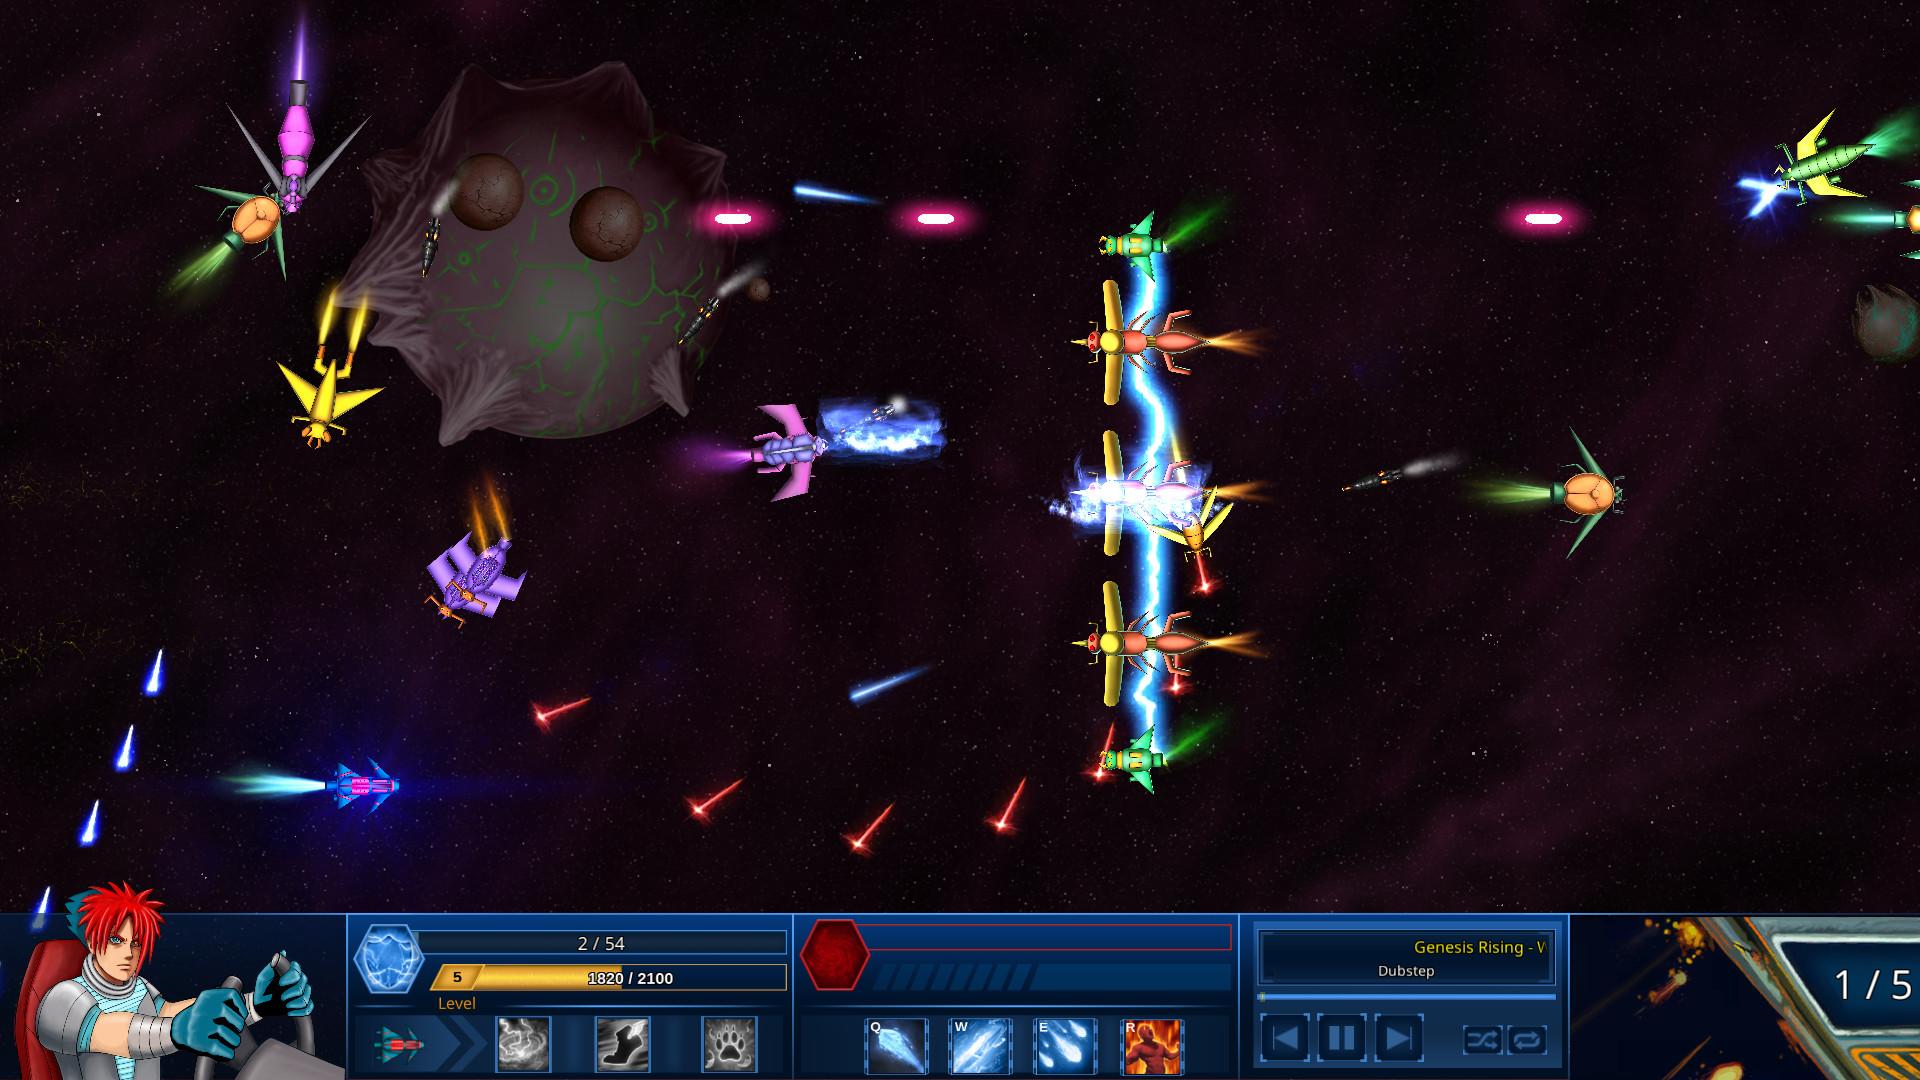 Screenshot №23 from game Survive in Space